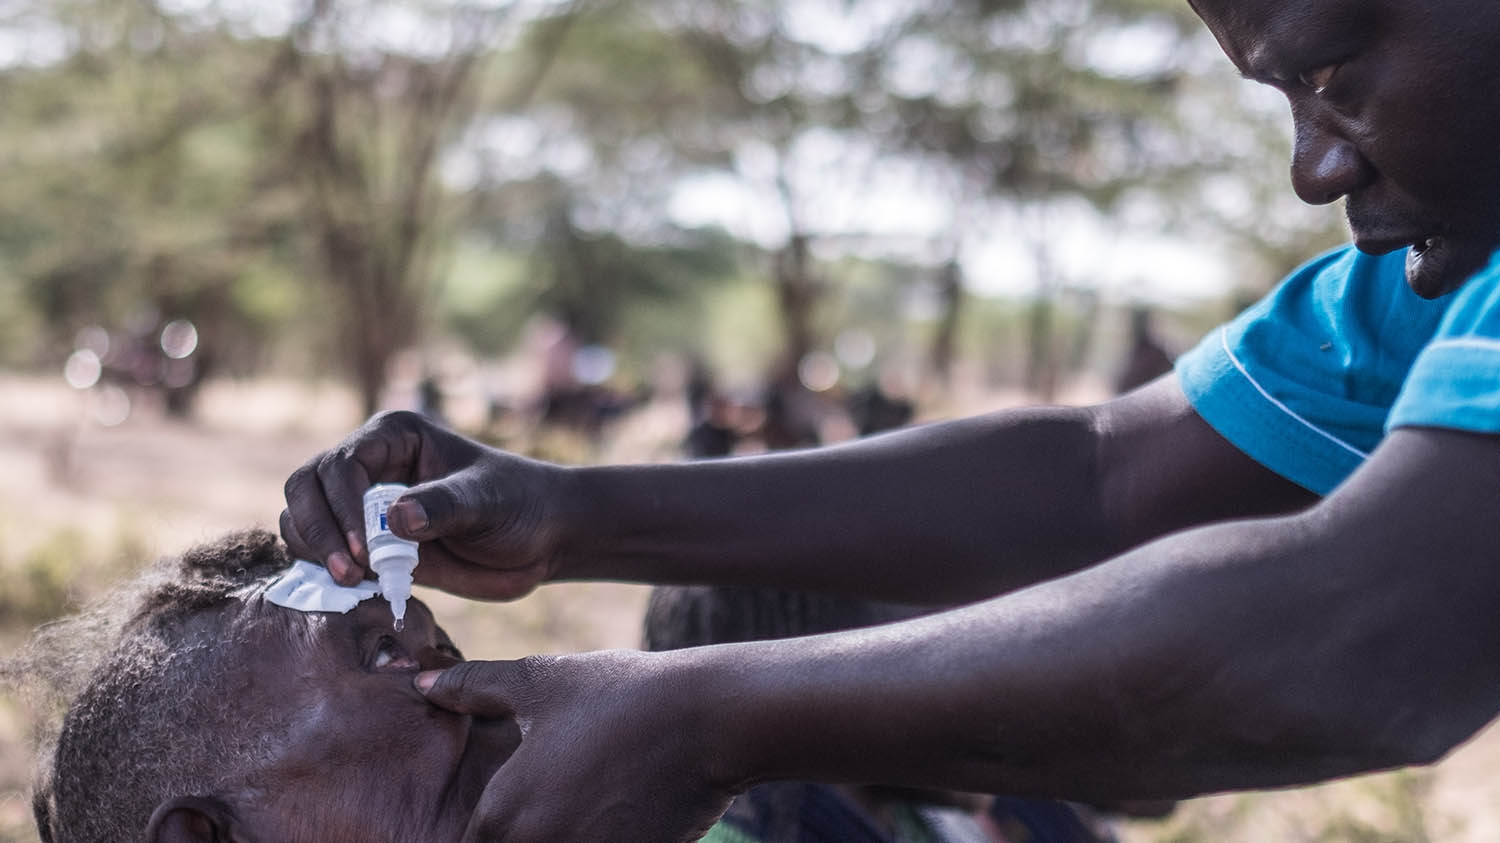 An eye health worker administers some eye drops into a person's eye.